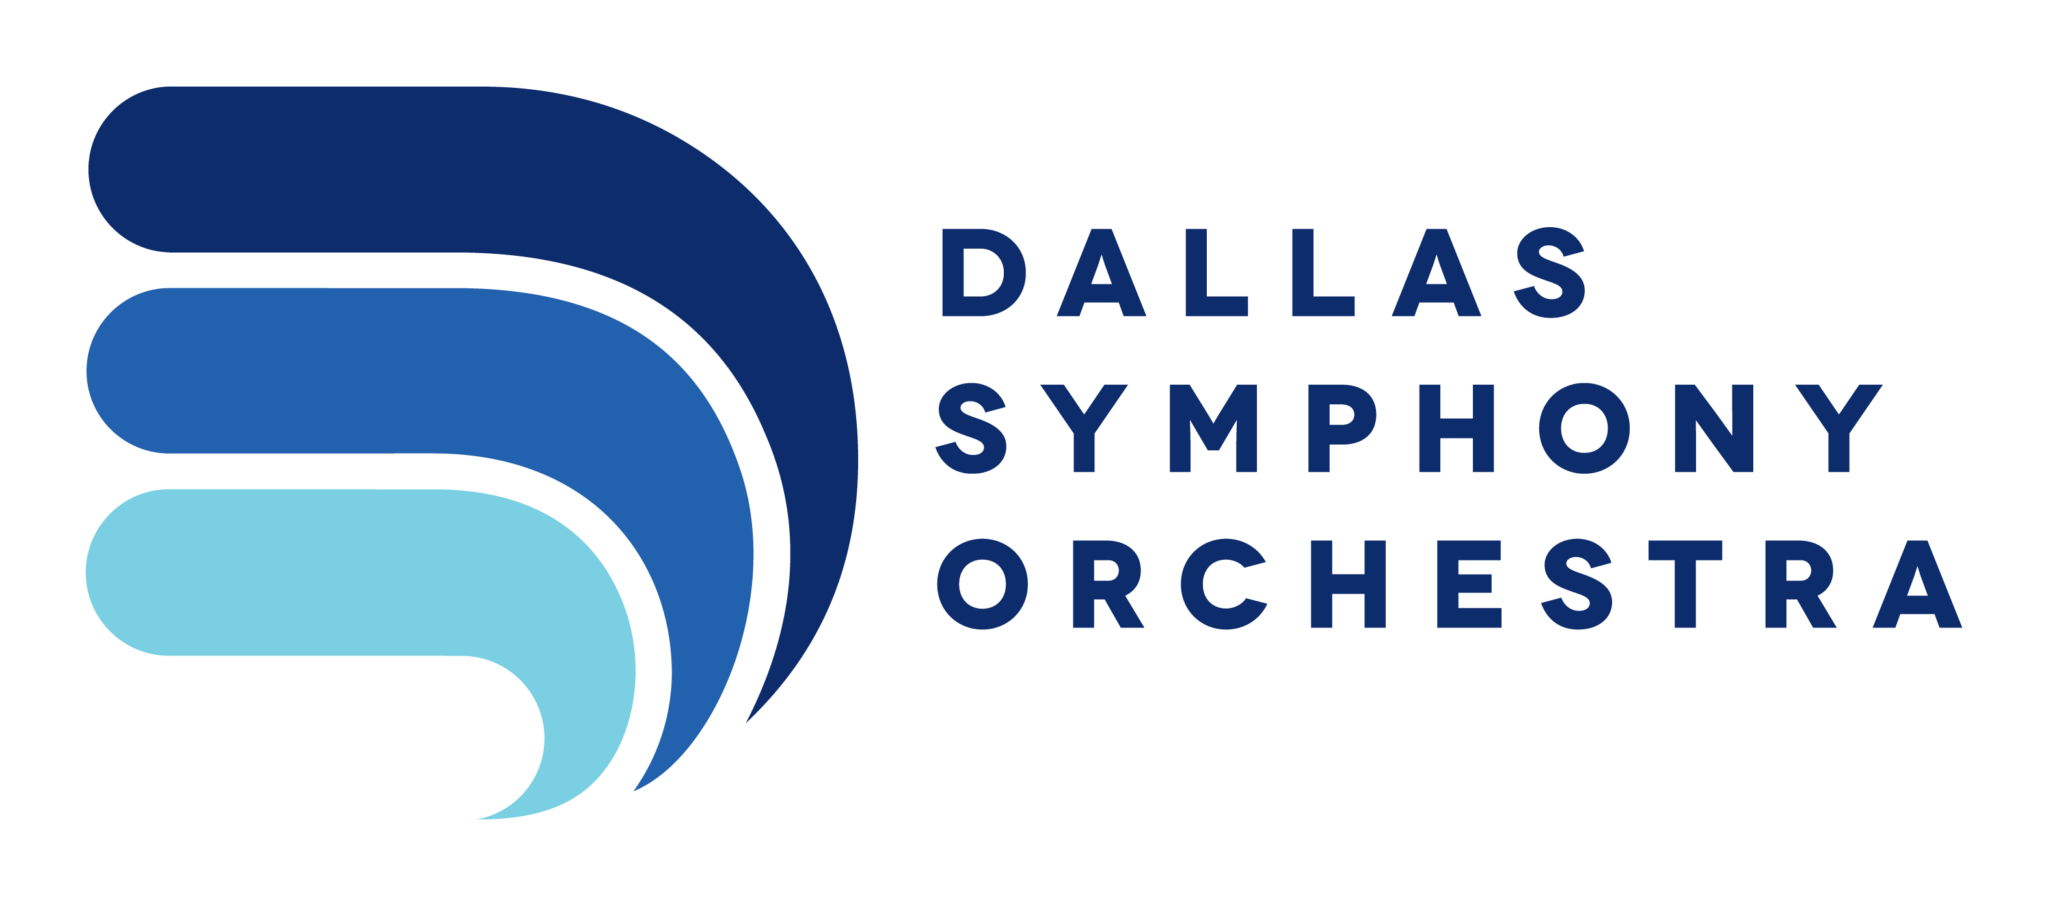 Announcing the 2019/20 DSO Season Dallas Symphony Orchestra